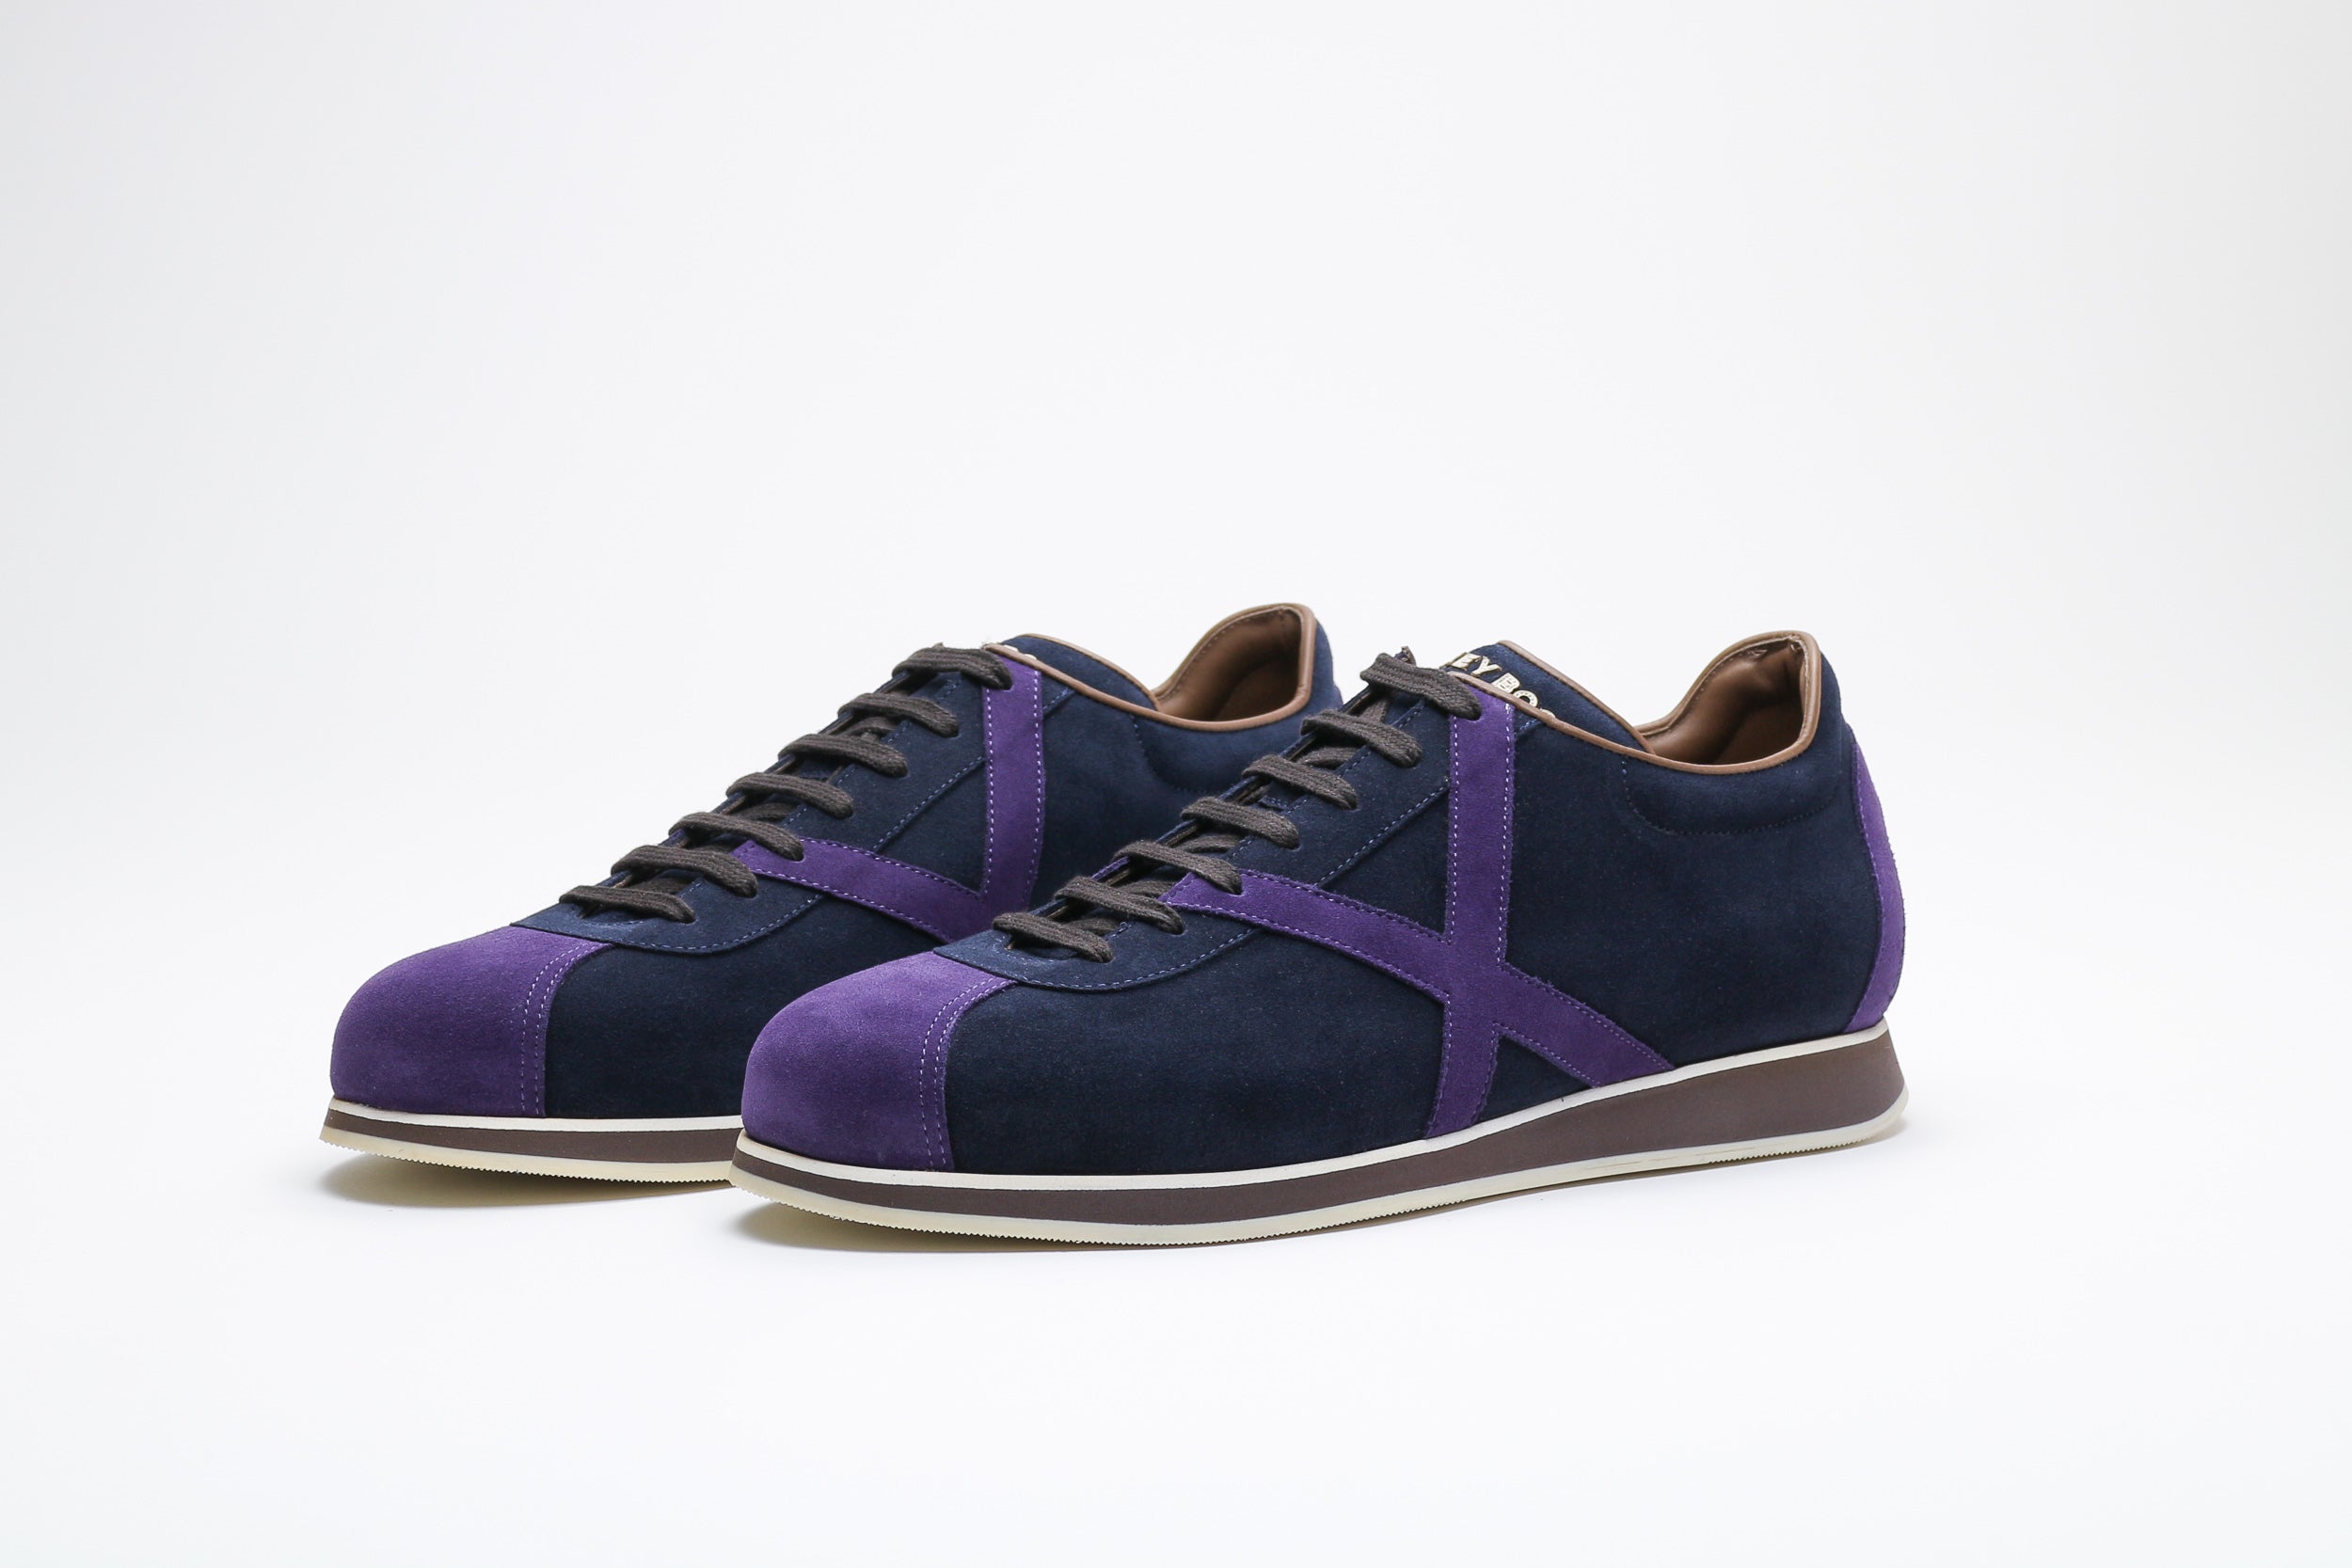 Zonkey Boot sneakers from dark blue and purple suede